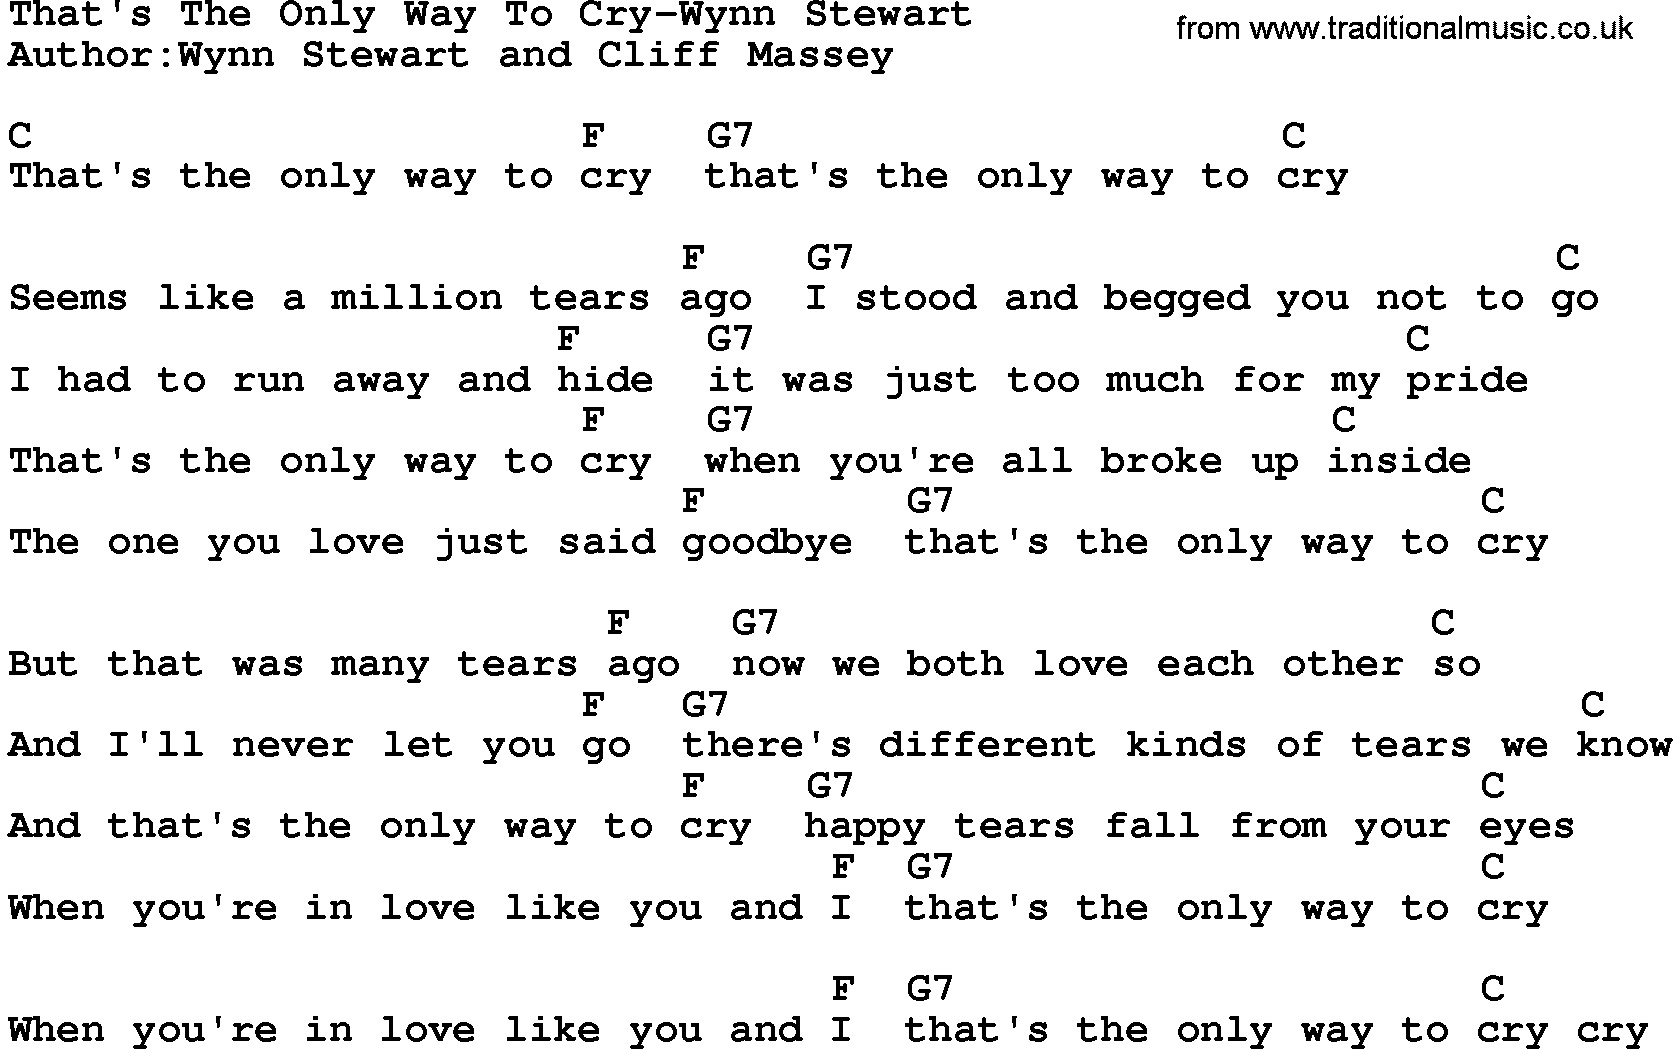 Country music song: That's The Only Way To Cry-Wynn Stewart lyrics and chords